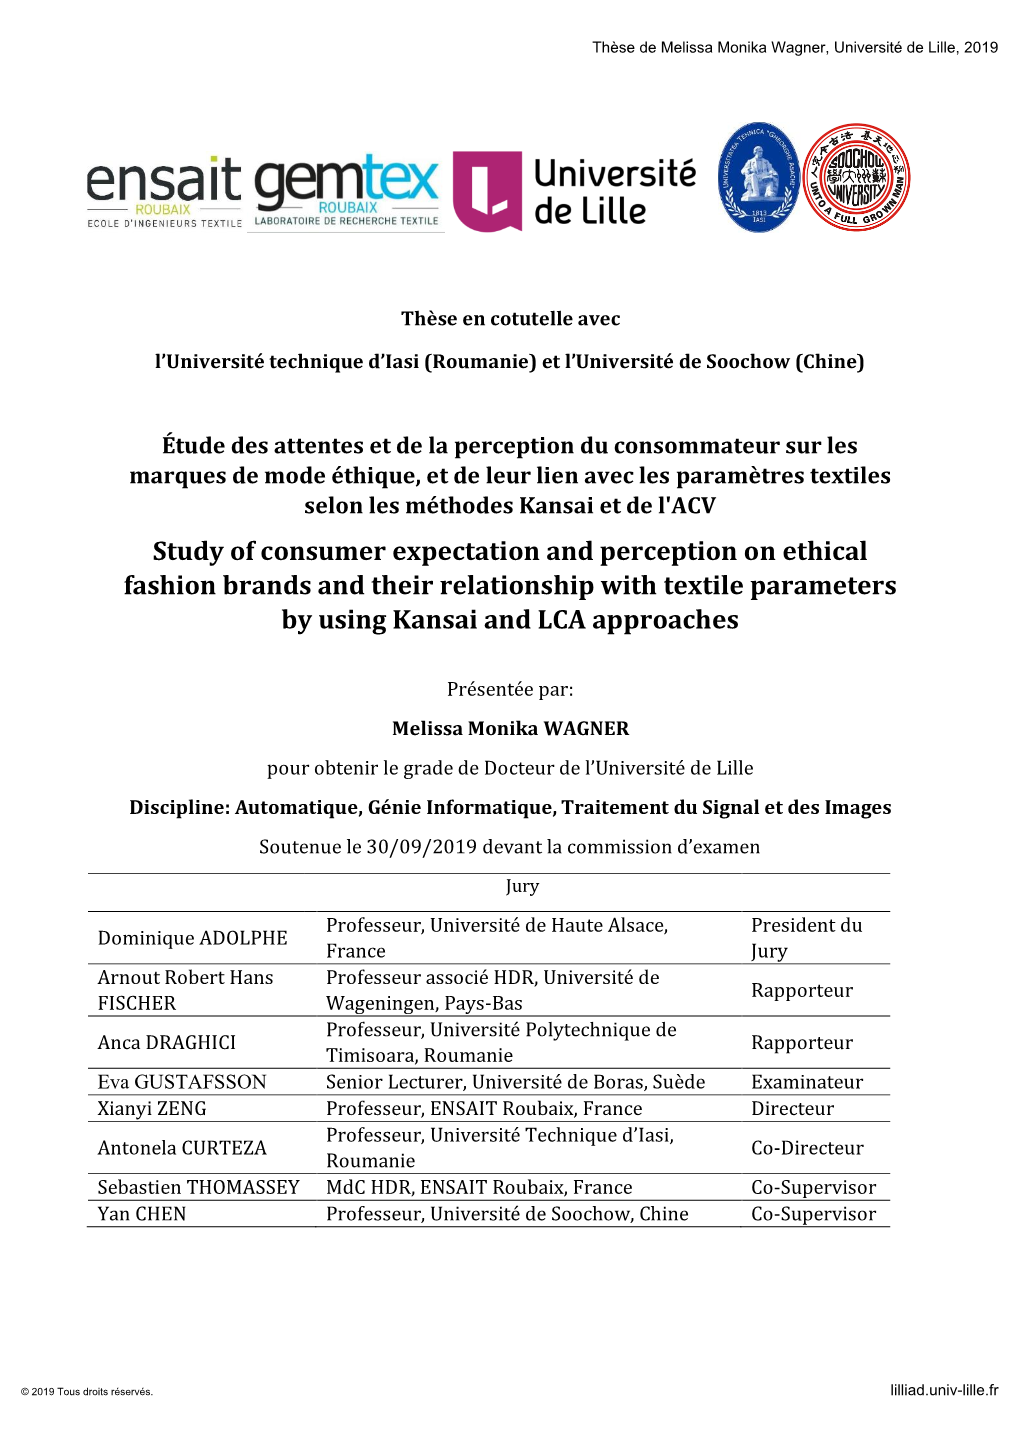 Study of Consumer Expectation and Perception on Ethical Fashion Brands and Their Relationship with Textile Parameters by Using Kansai and LCA Approaches